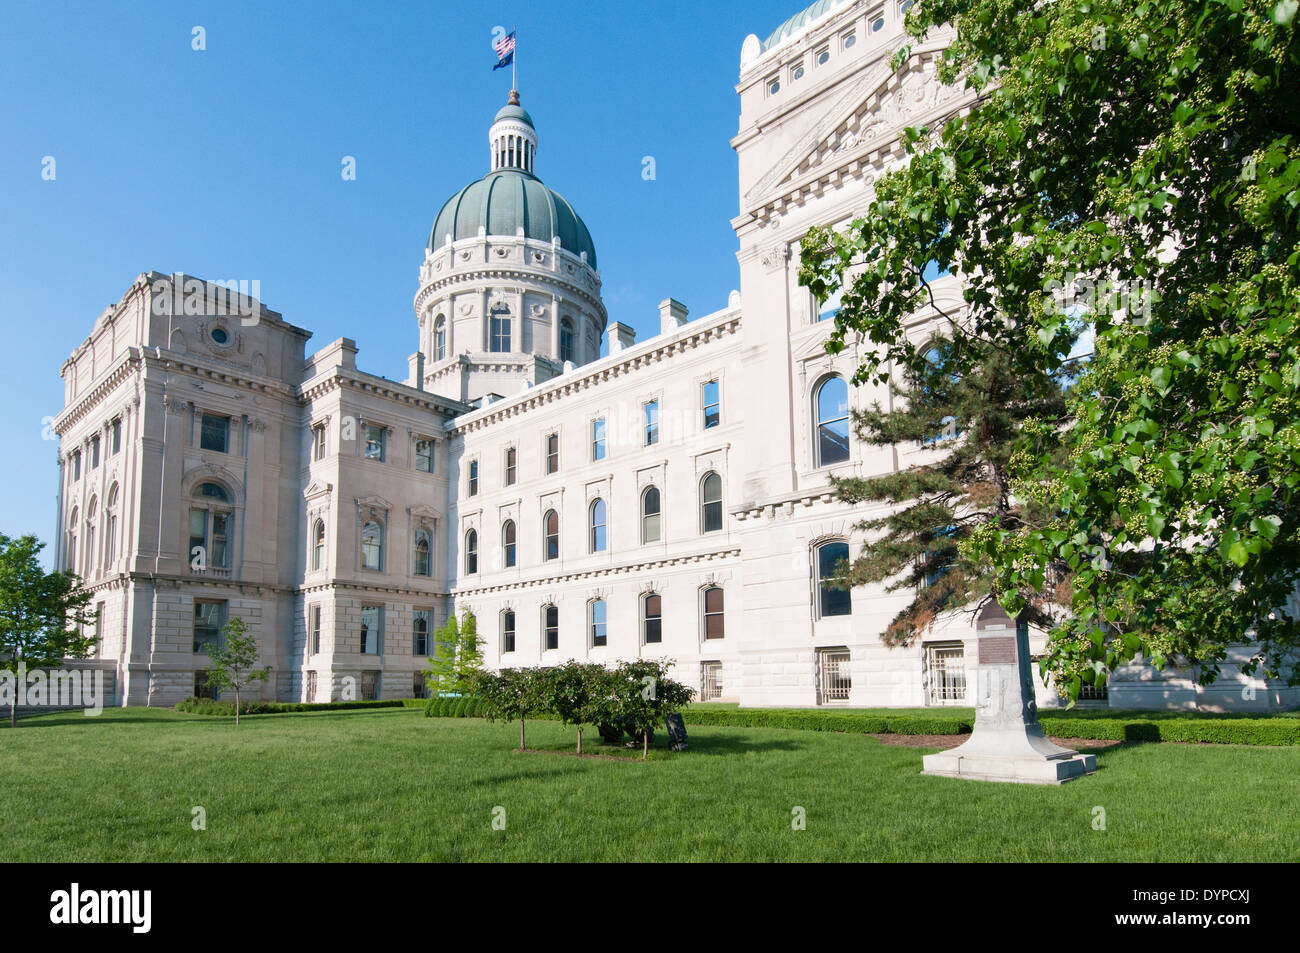 USA, Indiana, Indianapolis.  The Indiana Statehouse houses the General Assembly, Governors office and Supreme Court of Indiana. Stock Photo